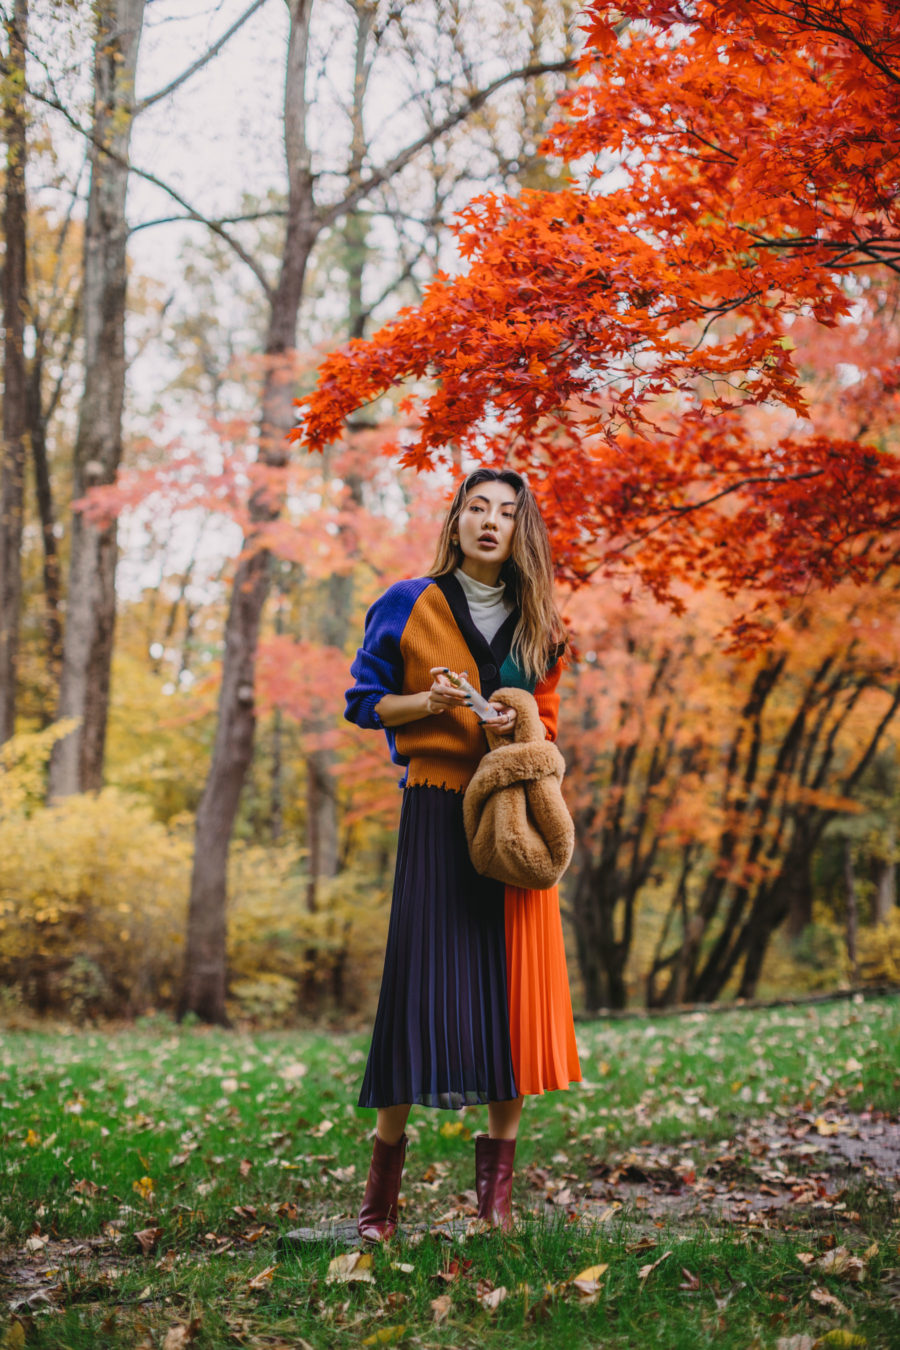 My recent summer to fall transition outfits - fall tones, orange and purple pleated skirt, red boots, multi color cardigan, beige turtle neck sweater // Jessica Wang - Notjessfashion.com